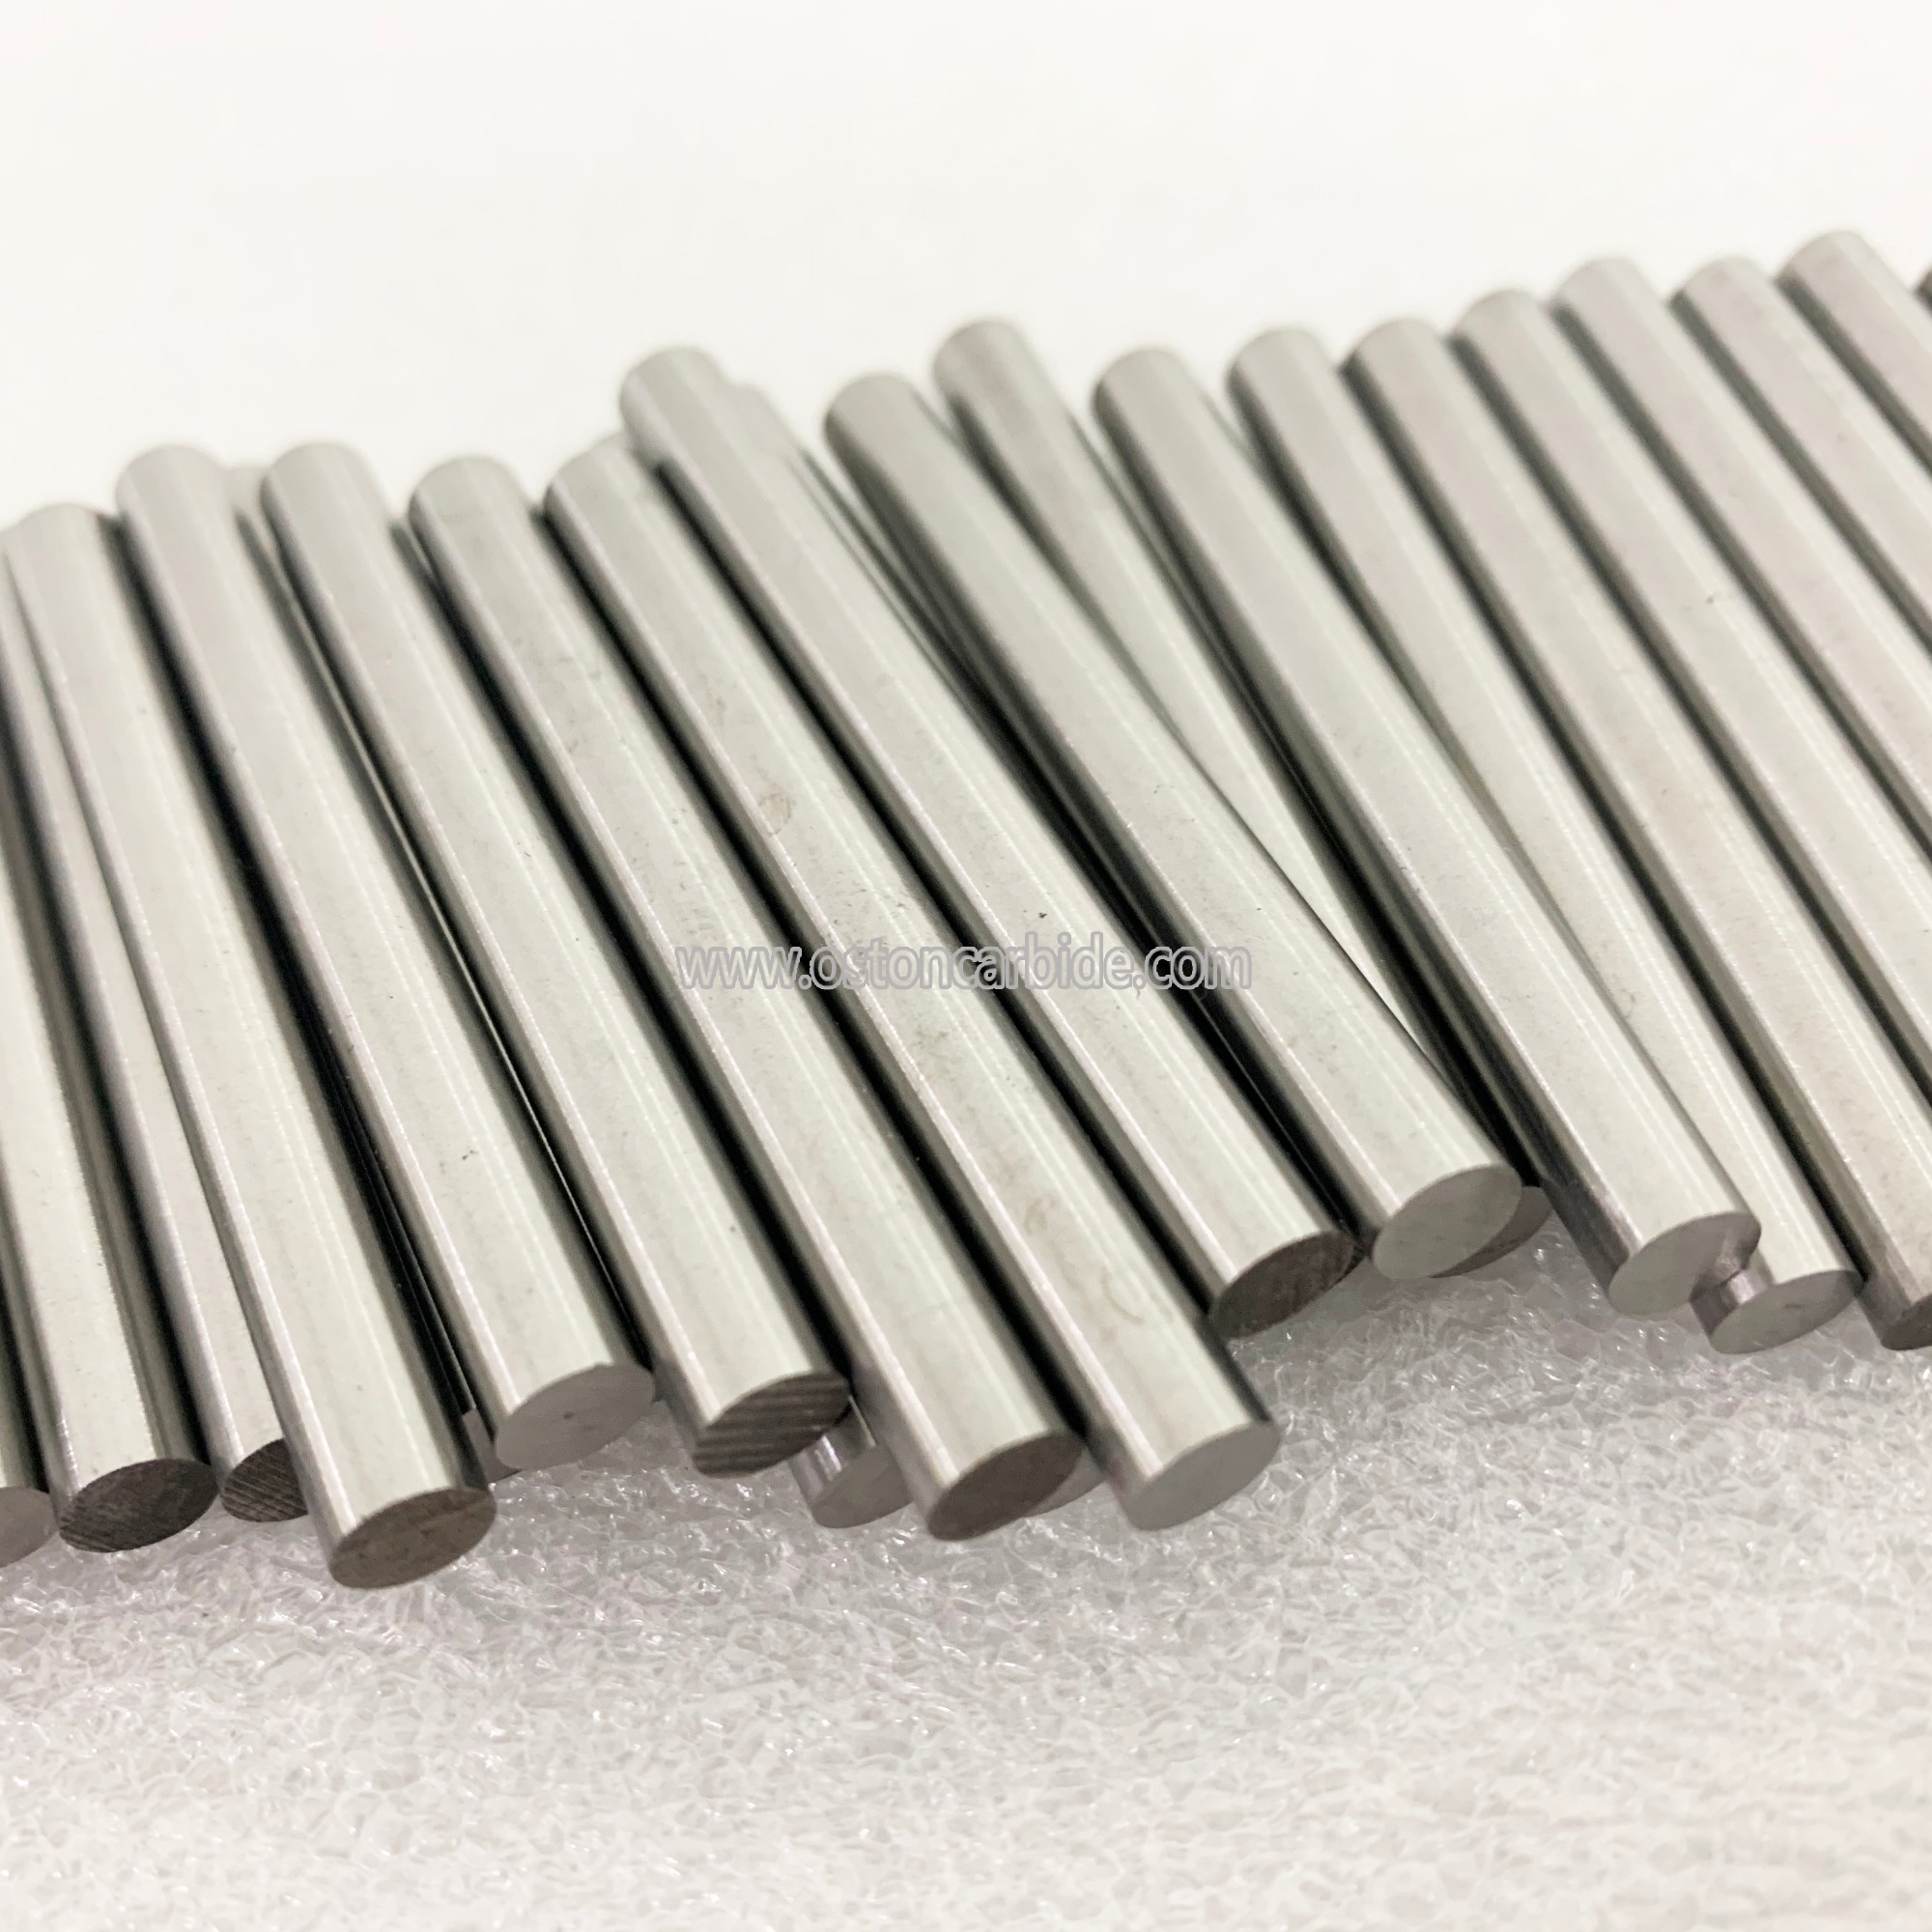 YG10X Polished Carbide Machinery Pins and Tungsten Needles